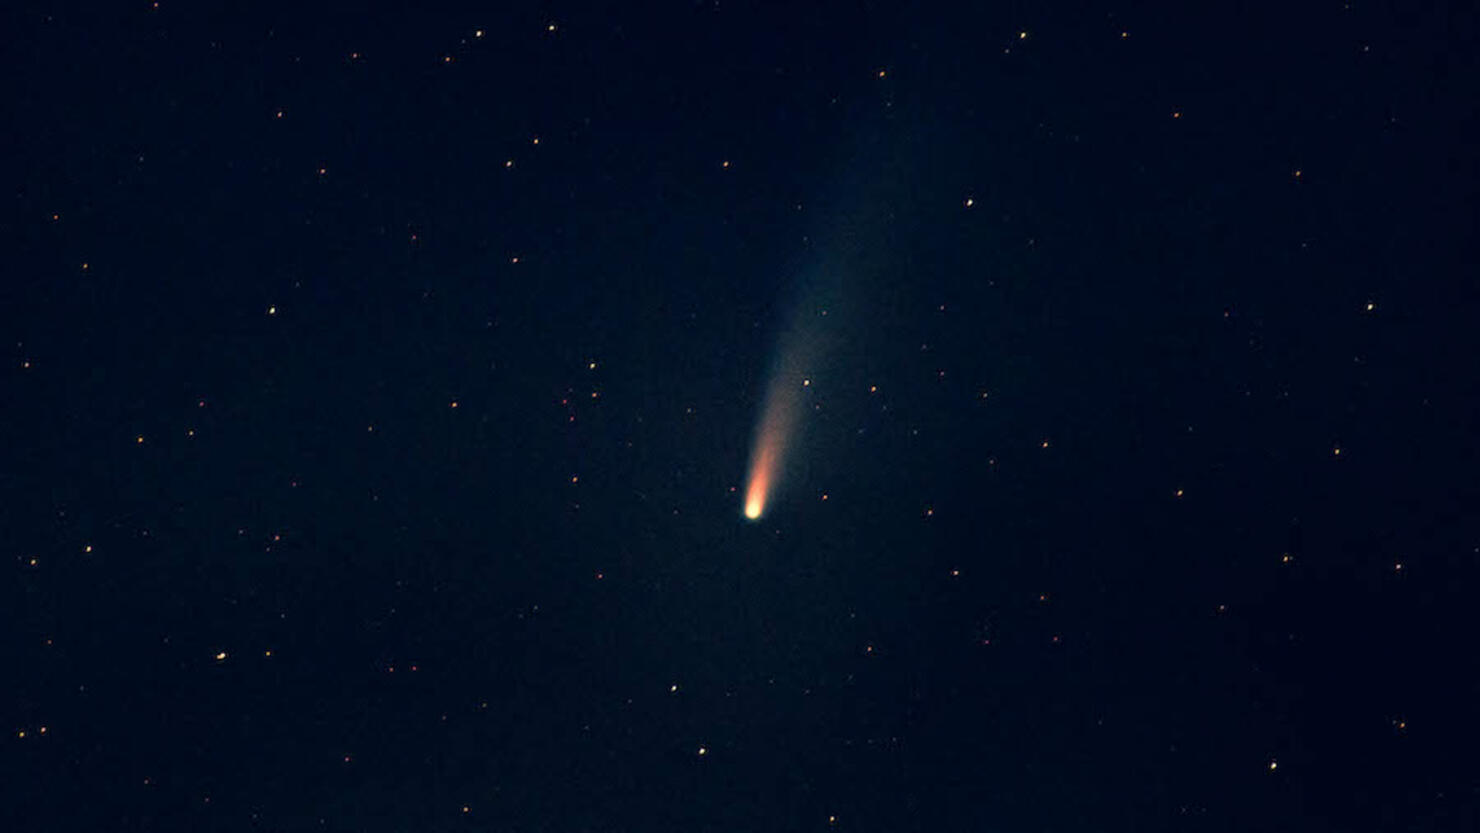 Stargazing the C/2020 F3 NEOWISE comet during night with stars.